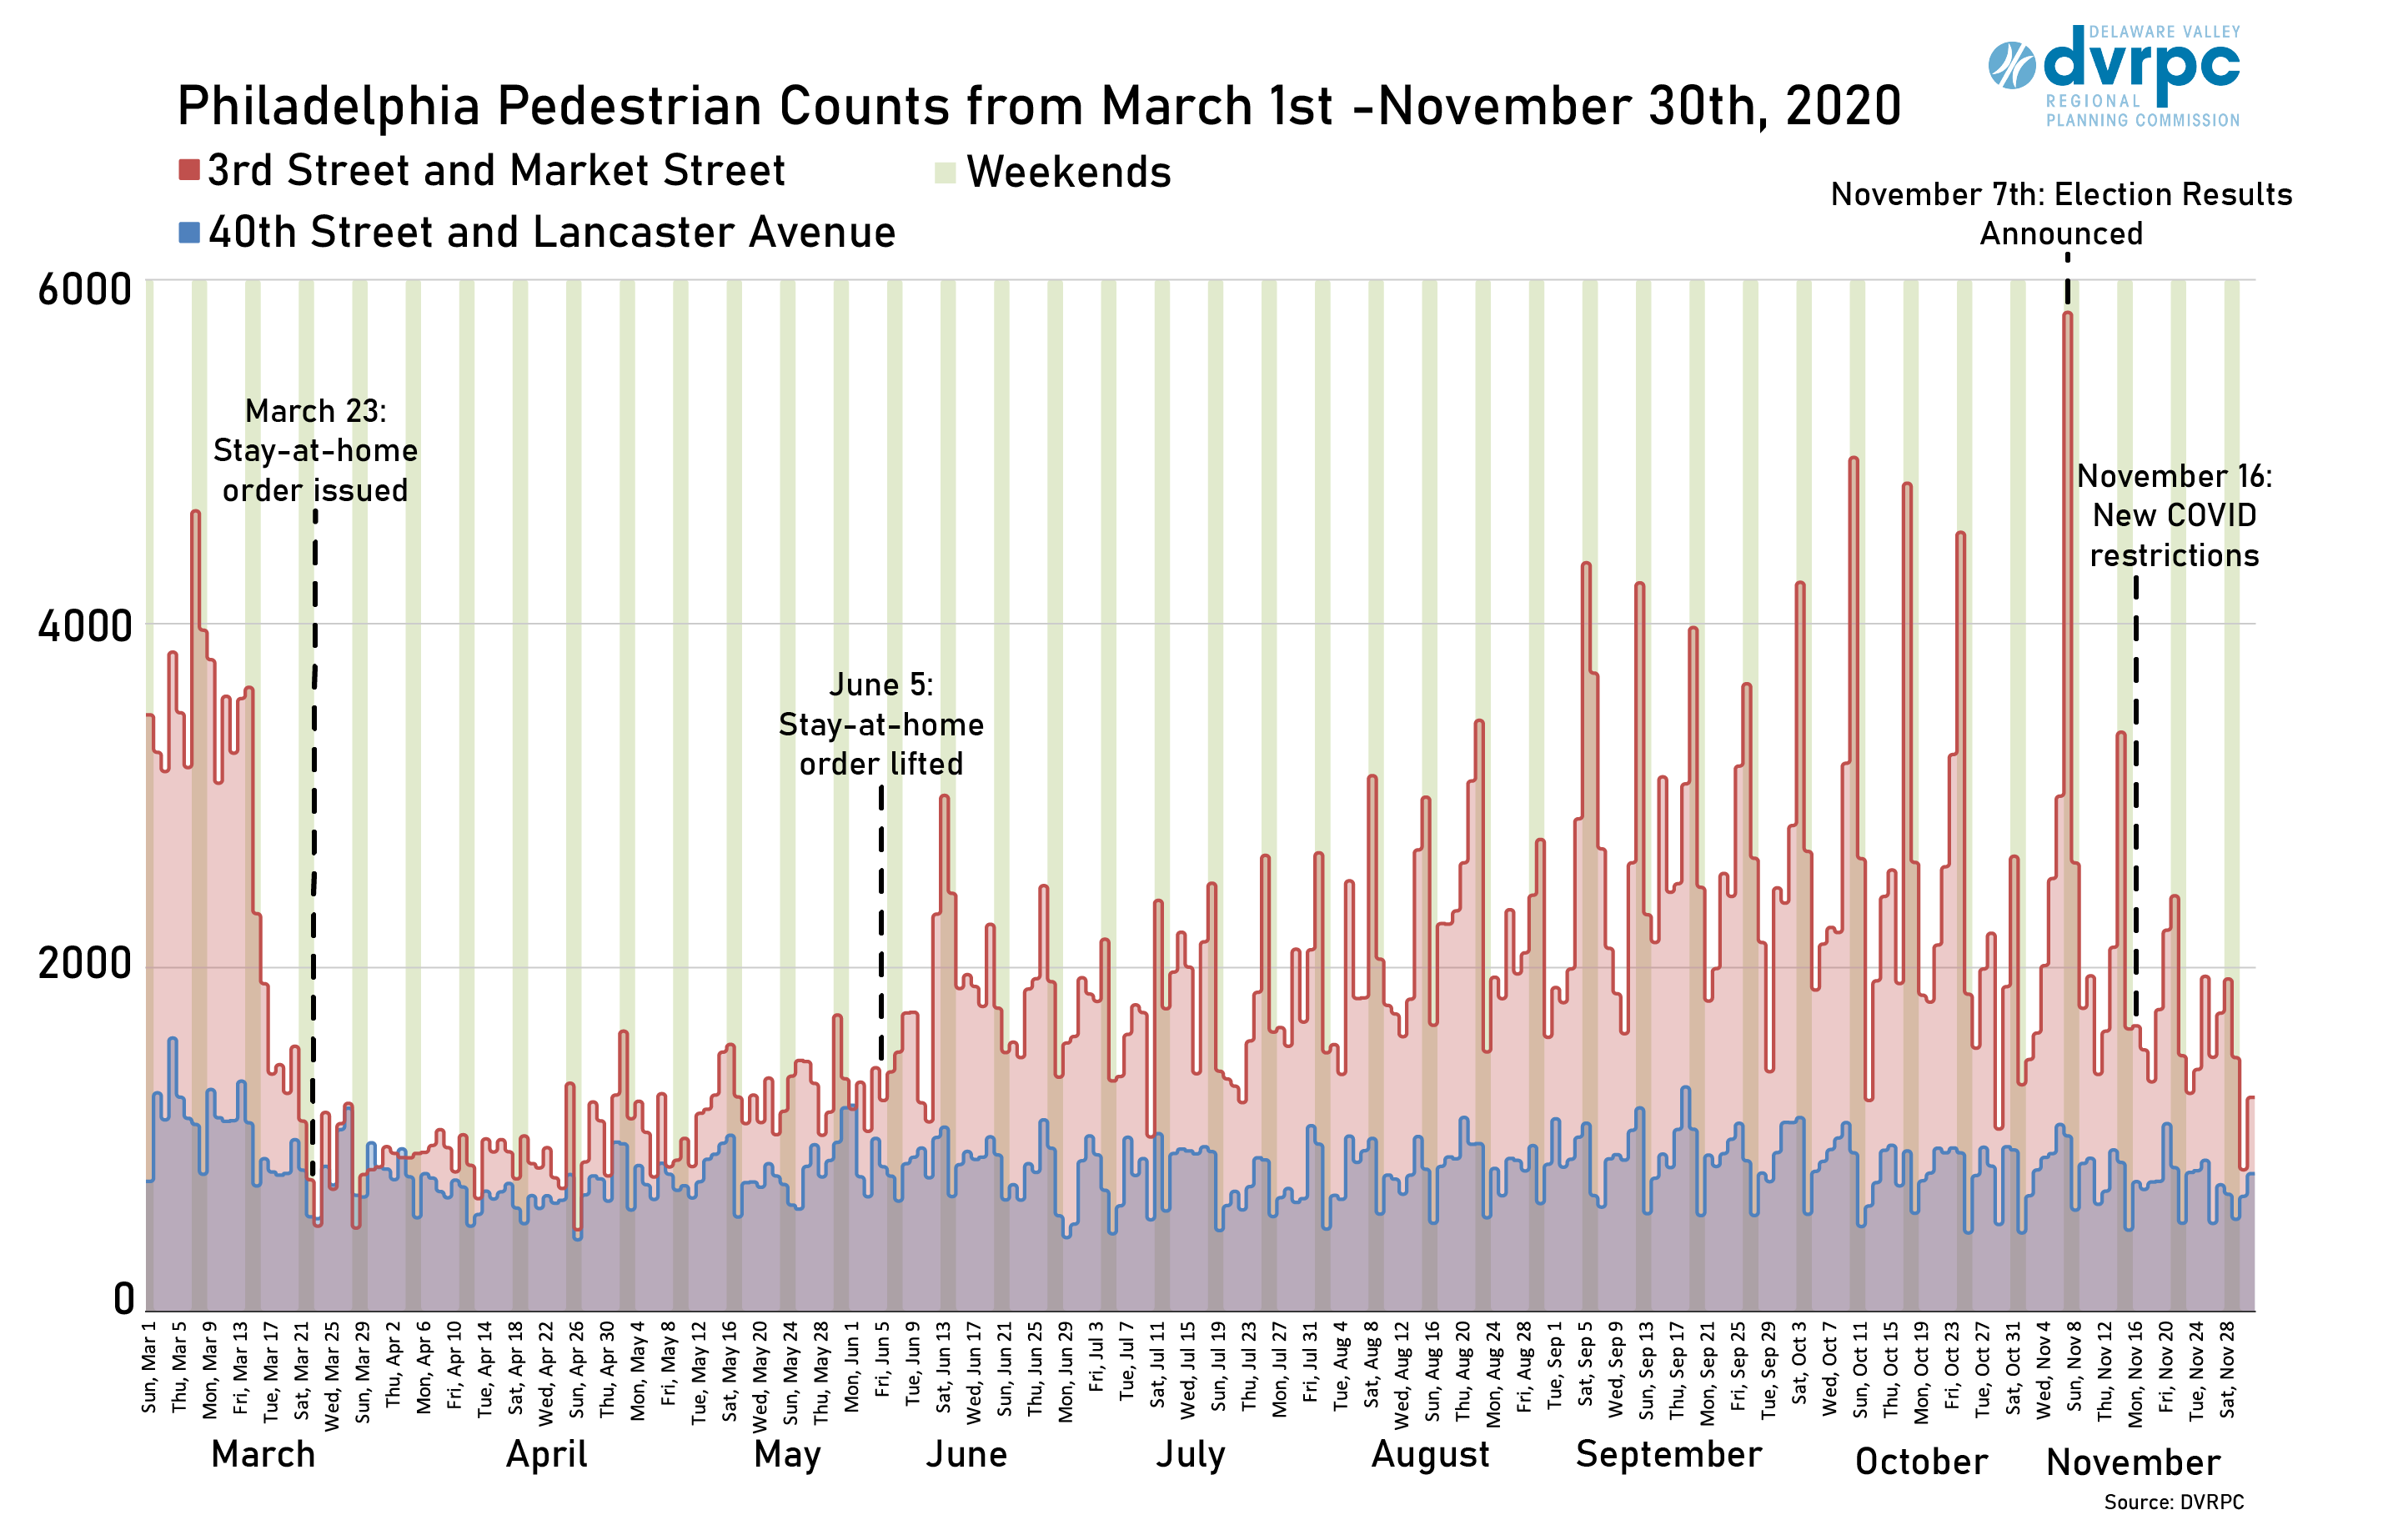 Philadelphia pedestrian counts from March 1st - November 30th 2020